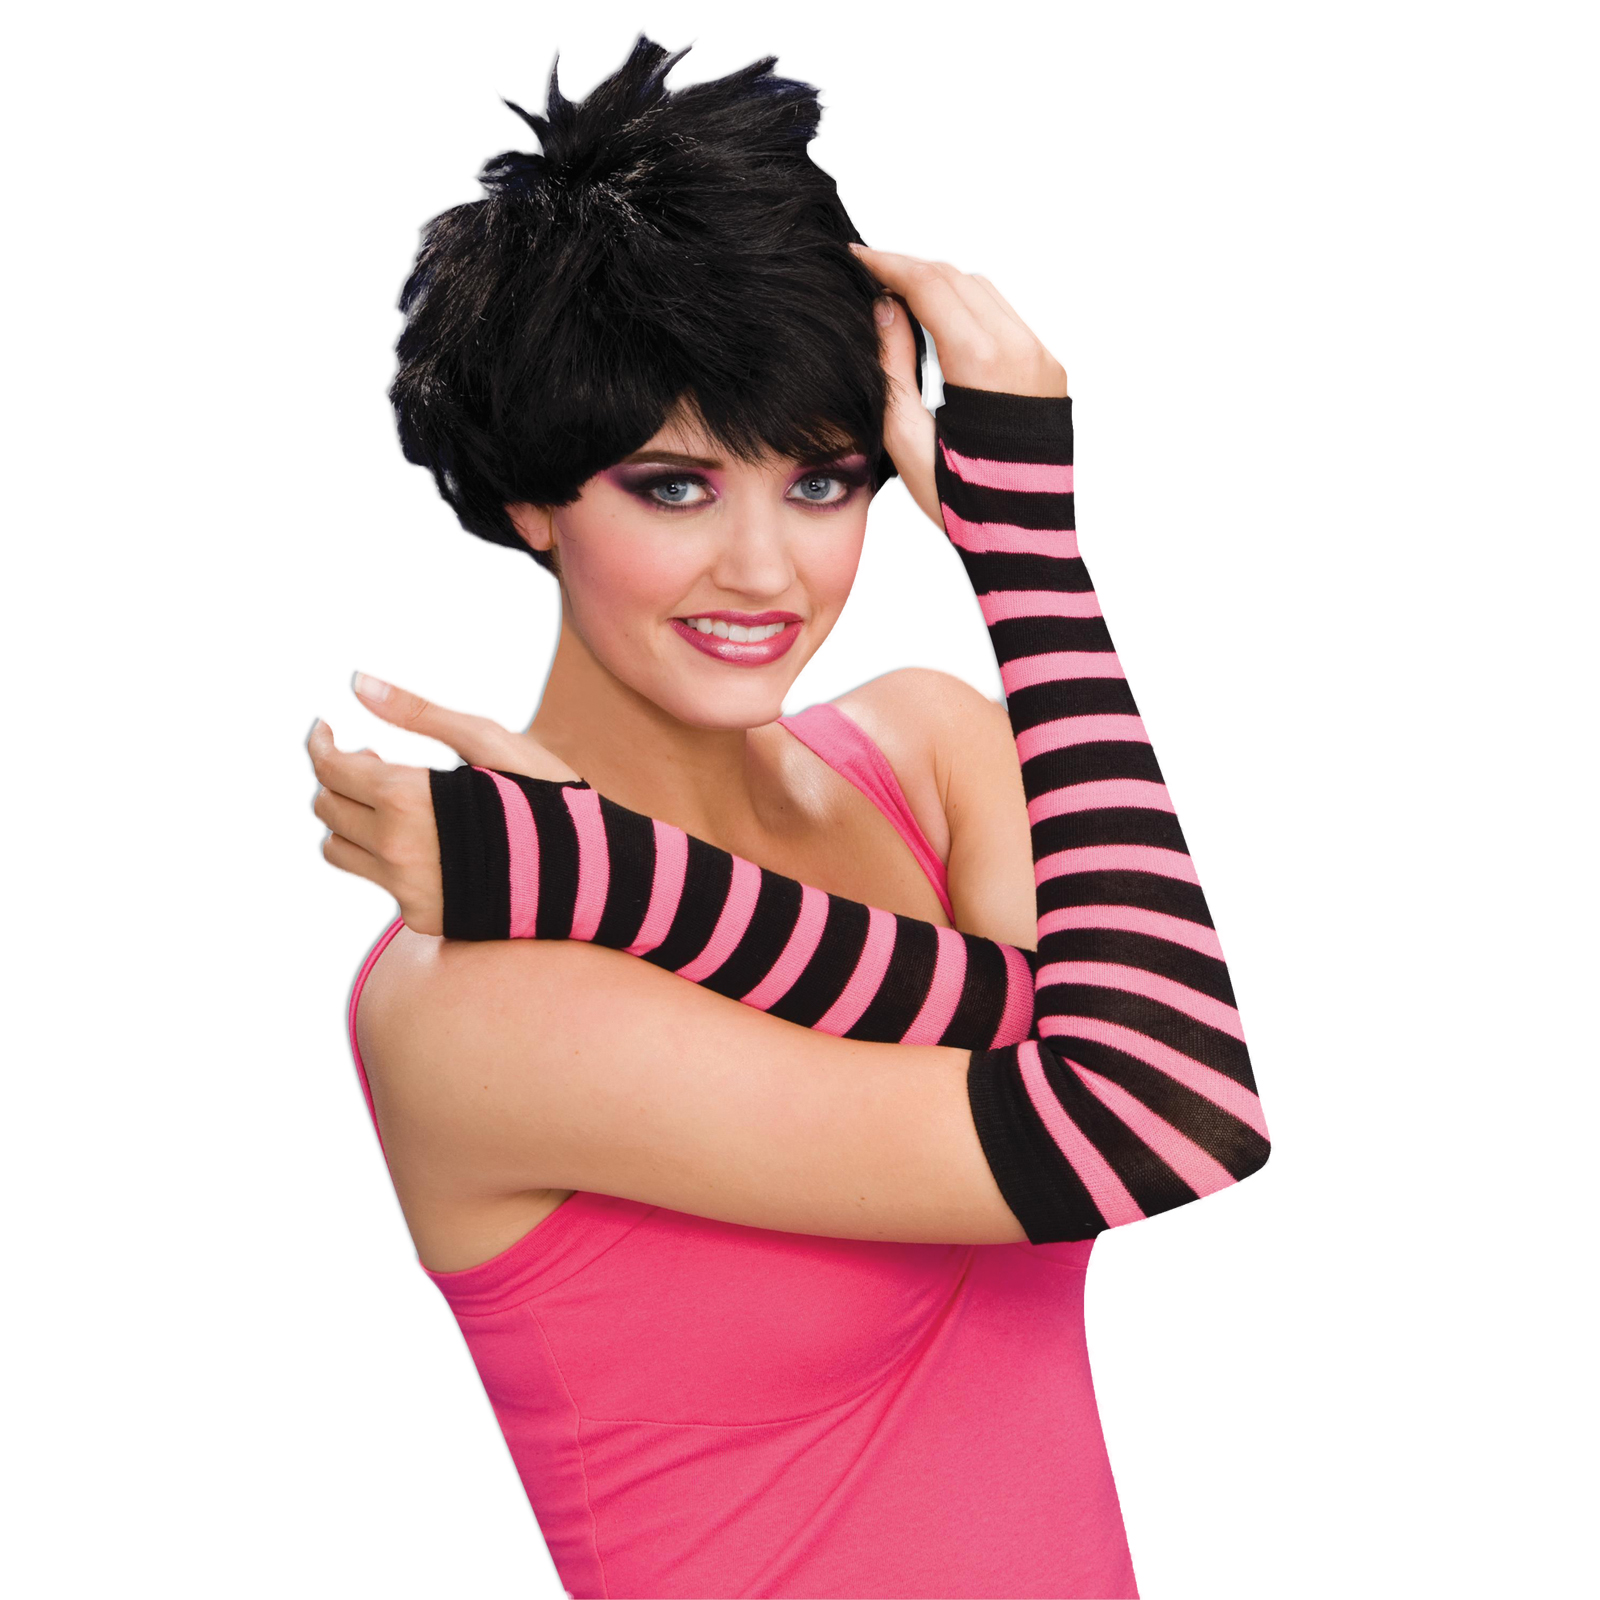 Gloves Striped Black And Pink Costume Accessory